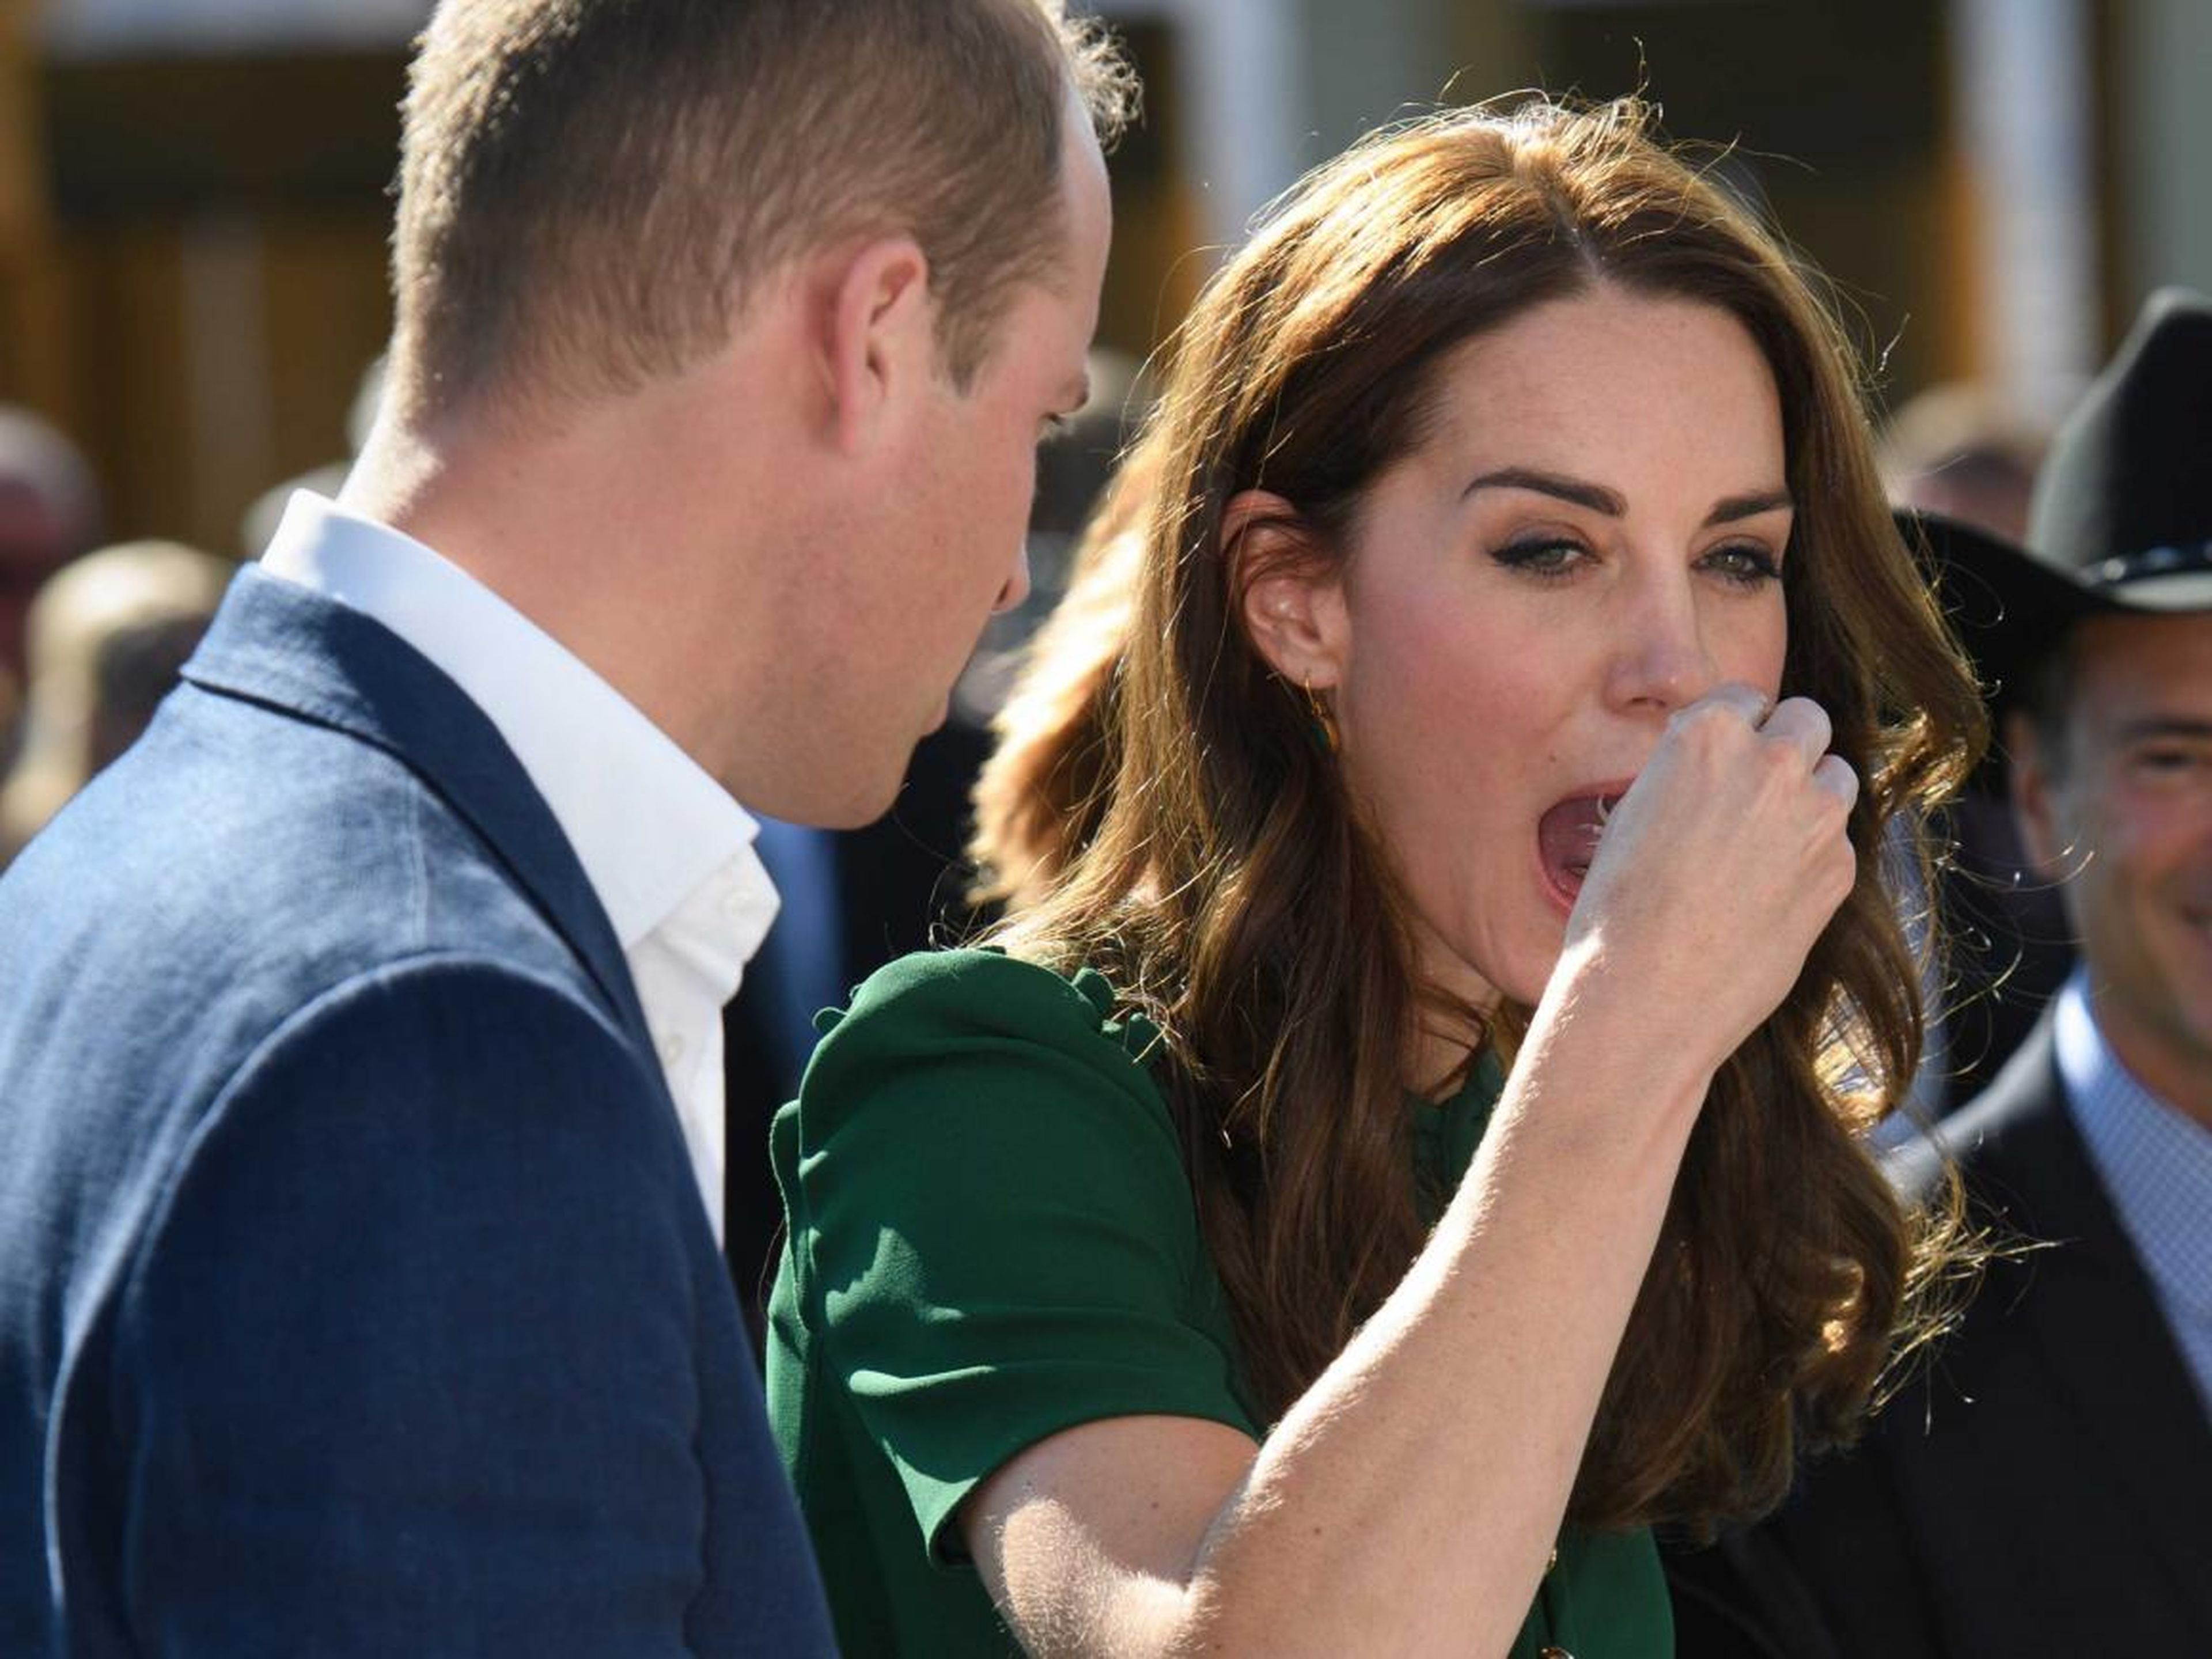 For Prince William and Kate Middleton, the cameras capture everything.